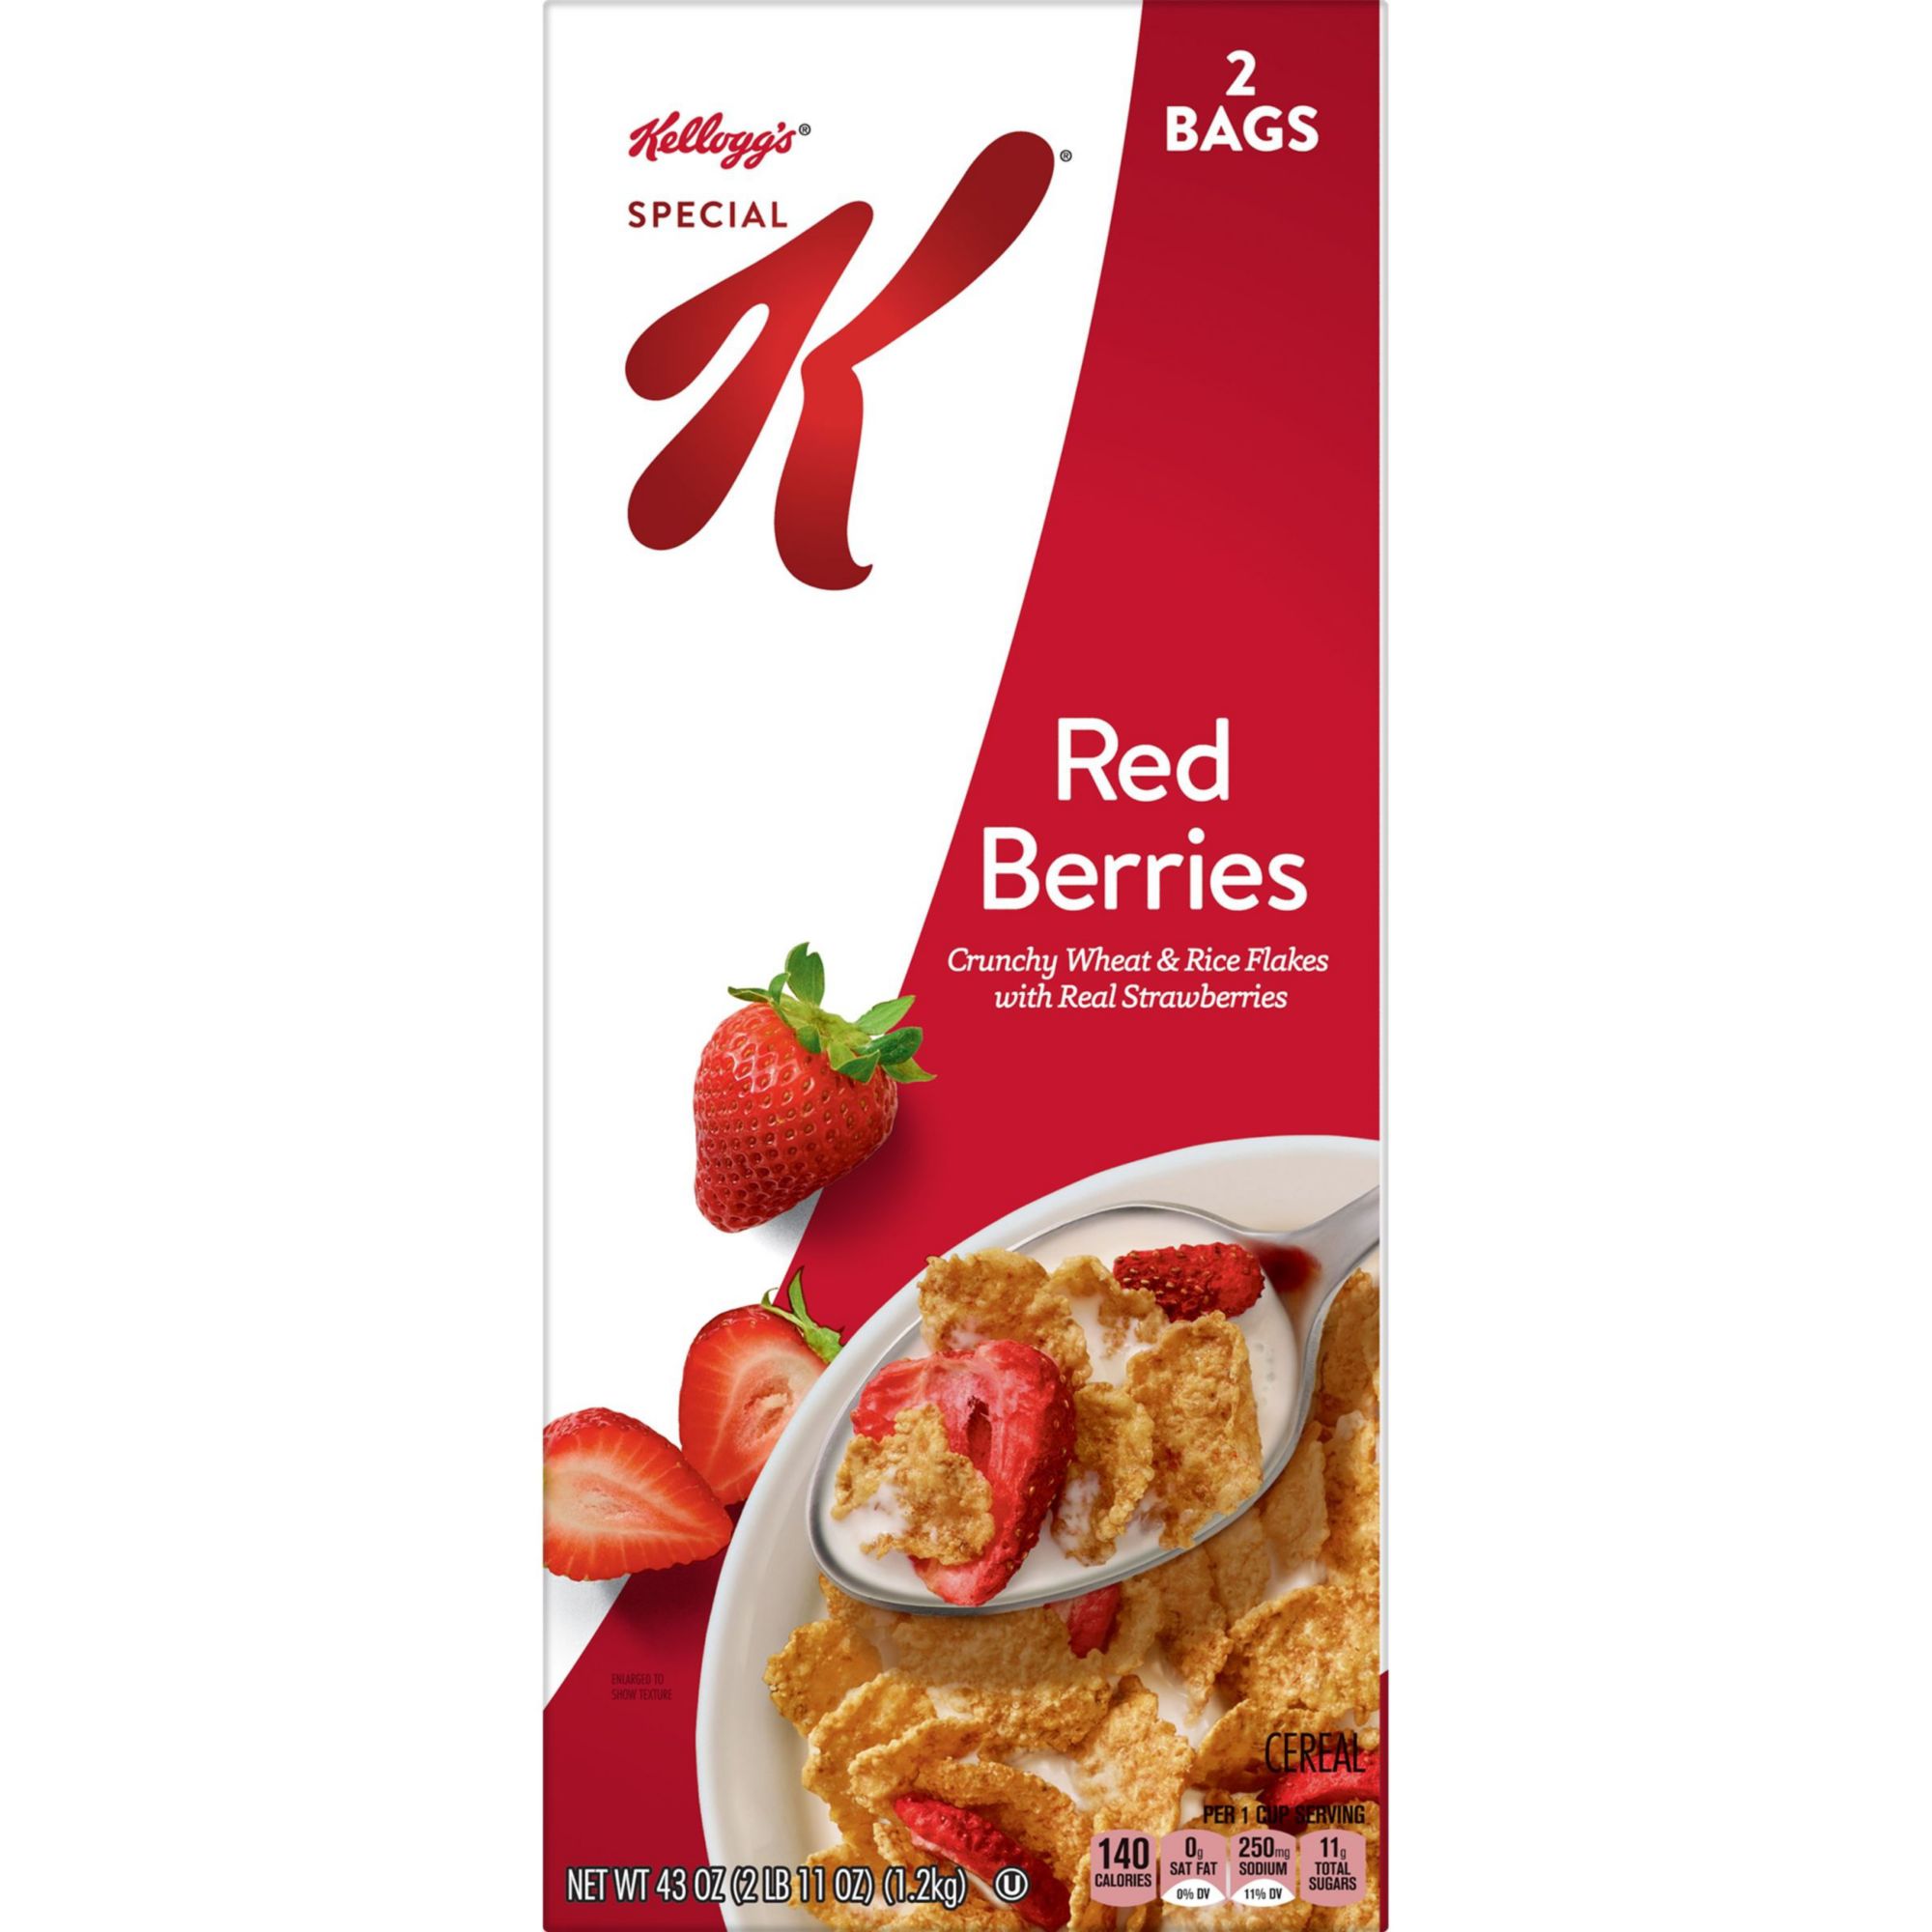 Kellogg's Special K with Berries Cereal